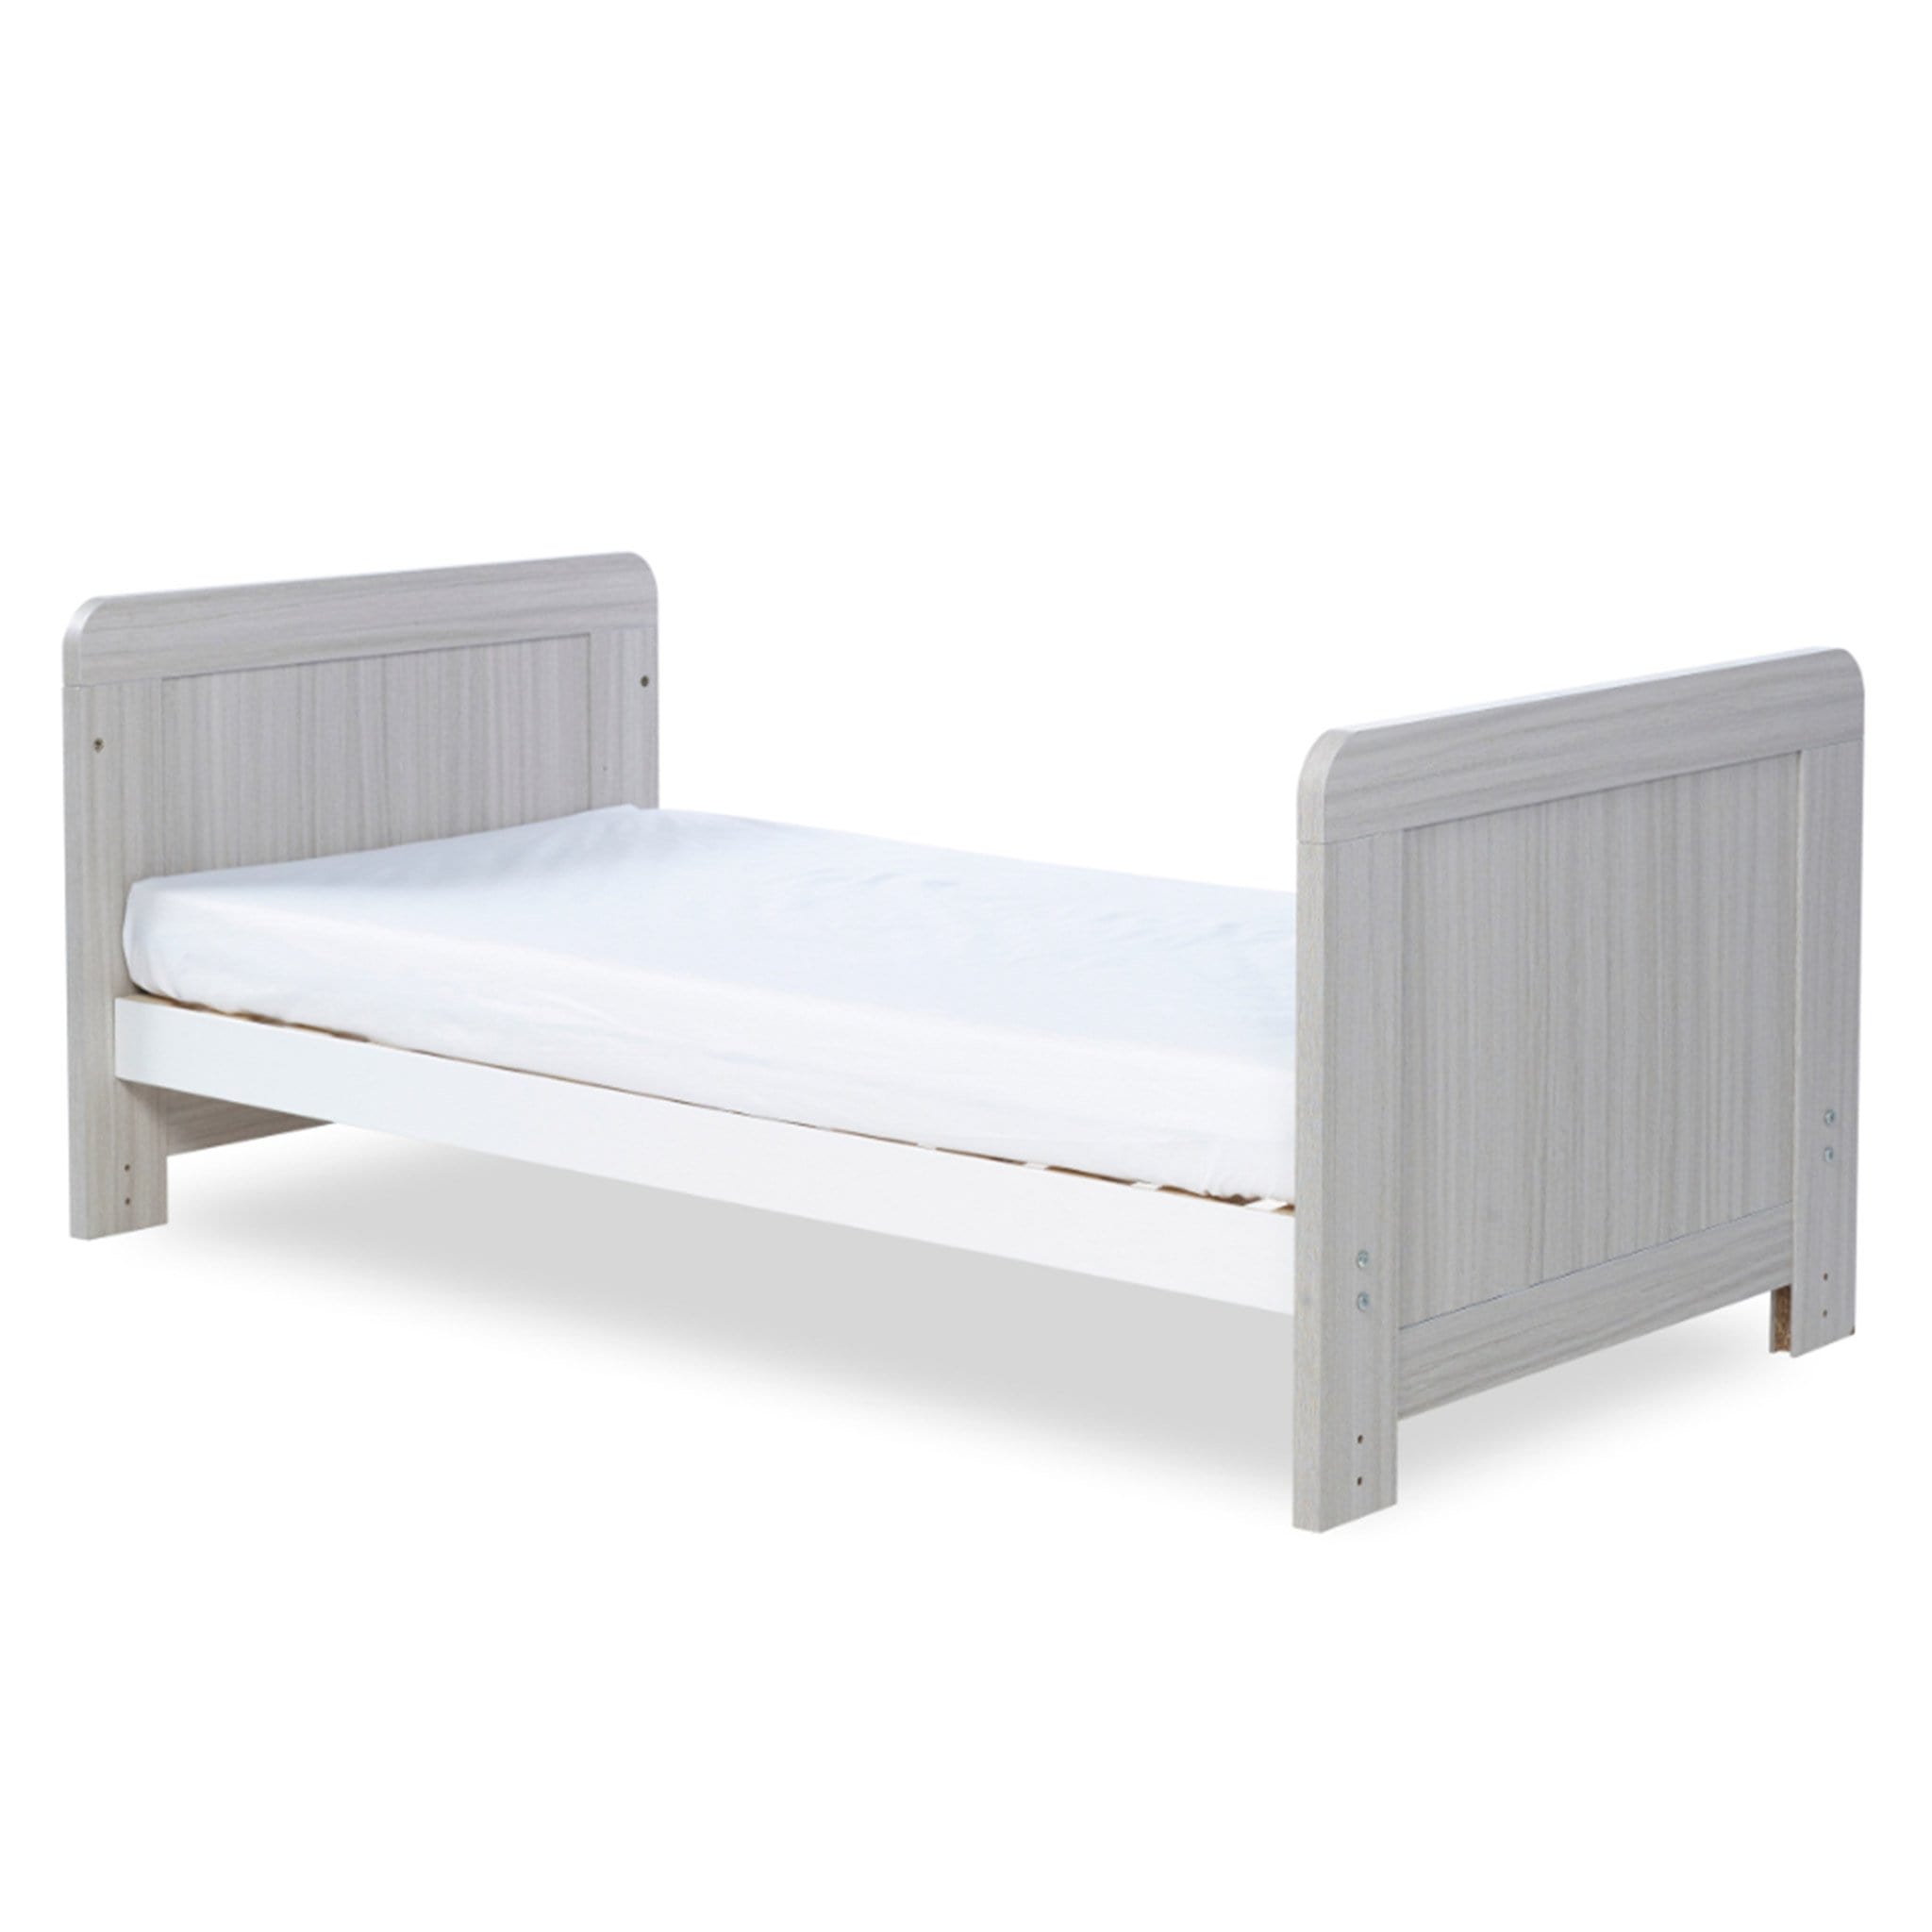 Ickle Bubba Cot Beds Ickle Bubba Pembrey Cotbed Ash Grey & White